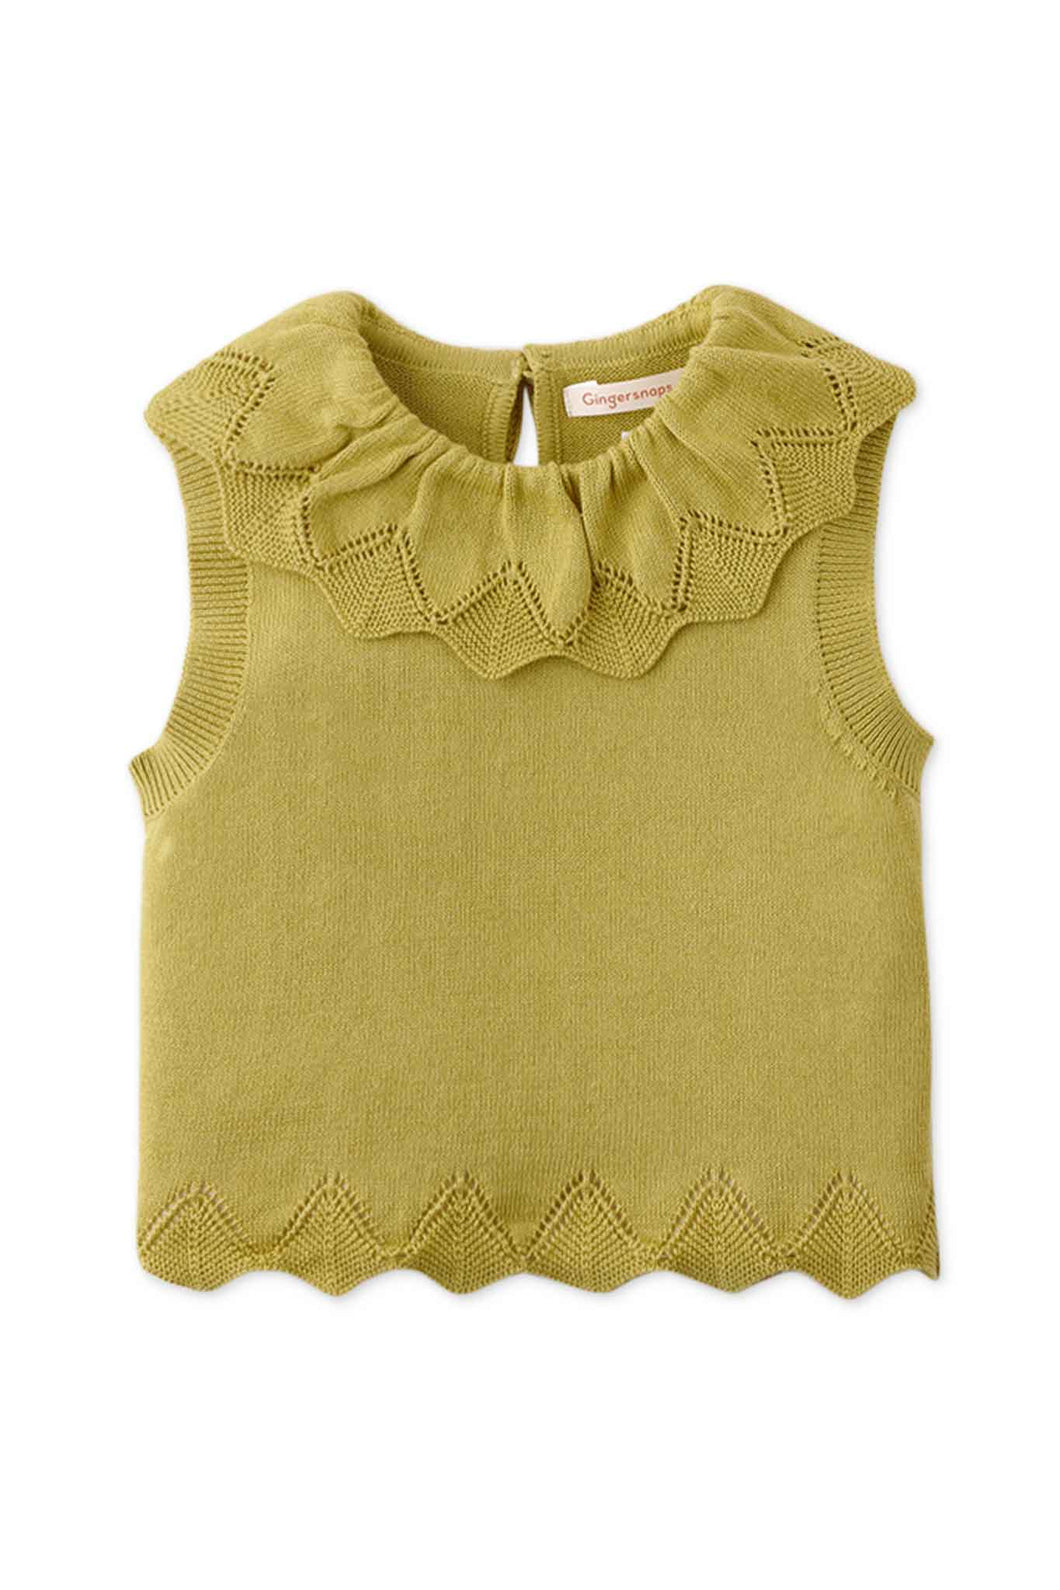 Gingersnaps Scalloped Edge Neck and Hem Knitted Top